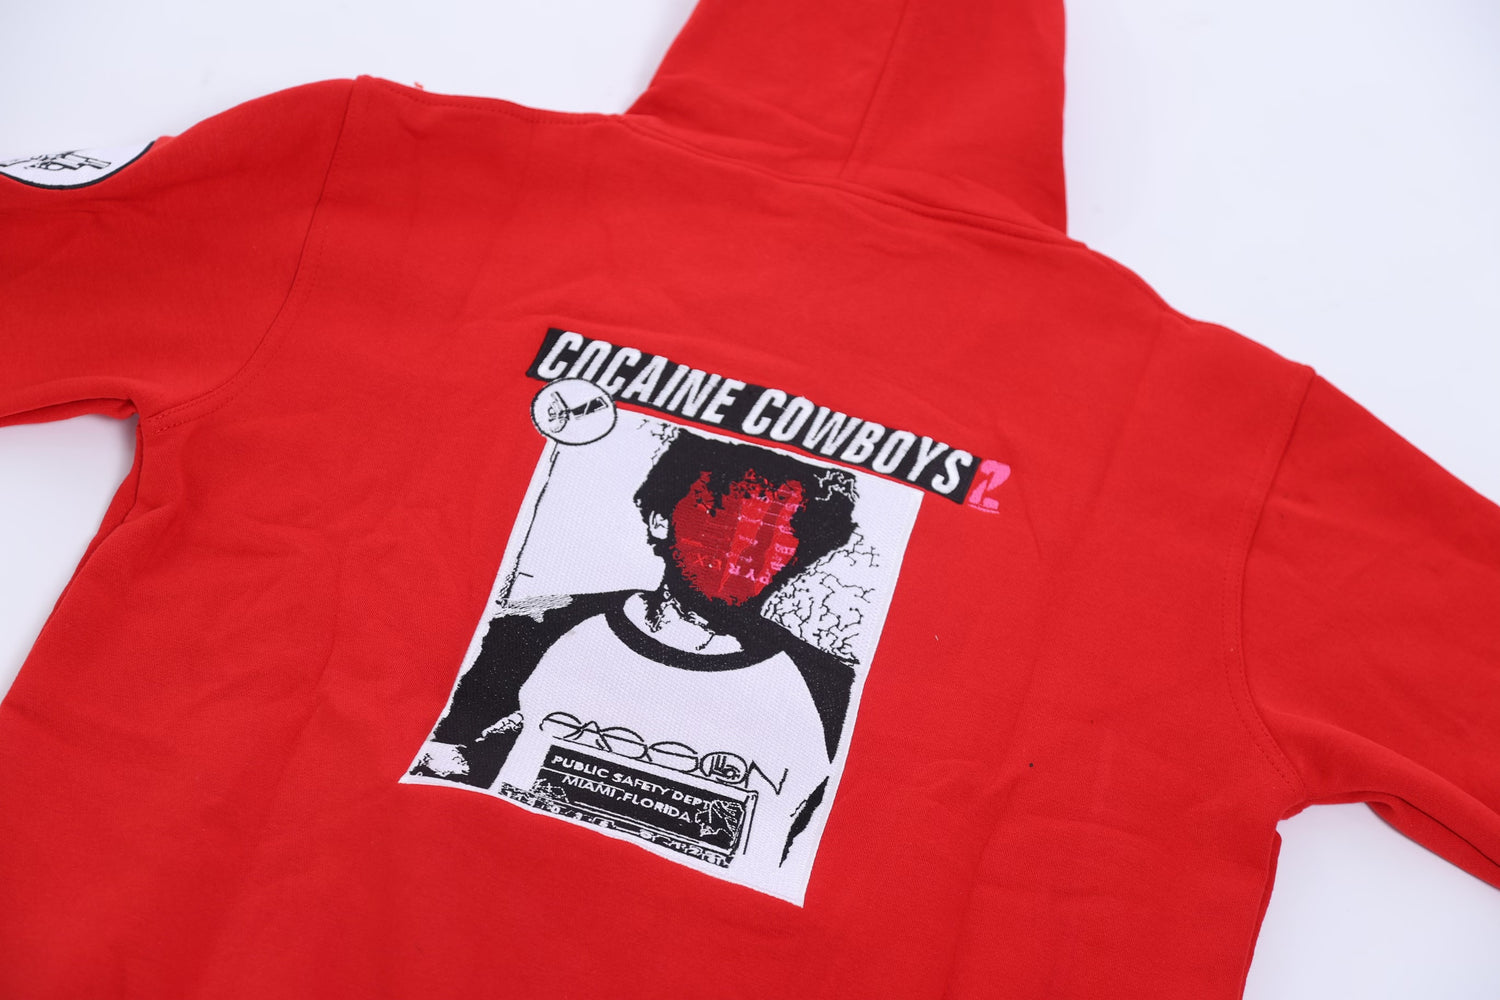 Benny The Butcher Hoodie Classic Celebrity Hoodie